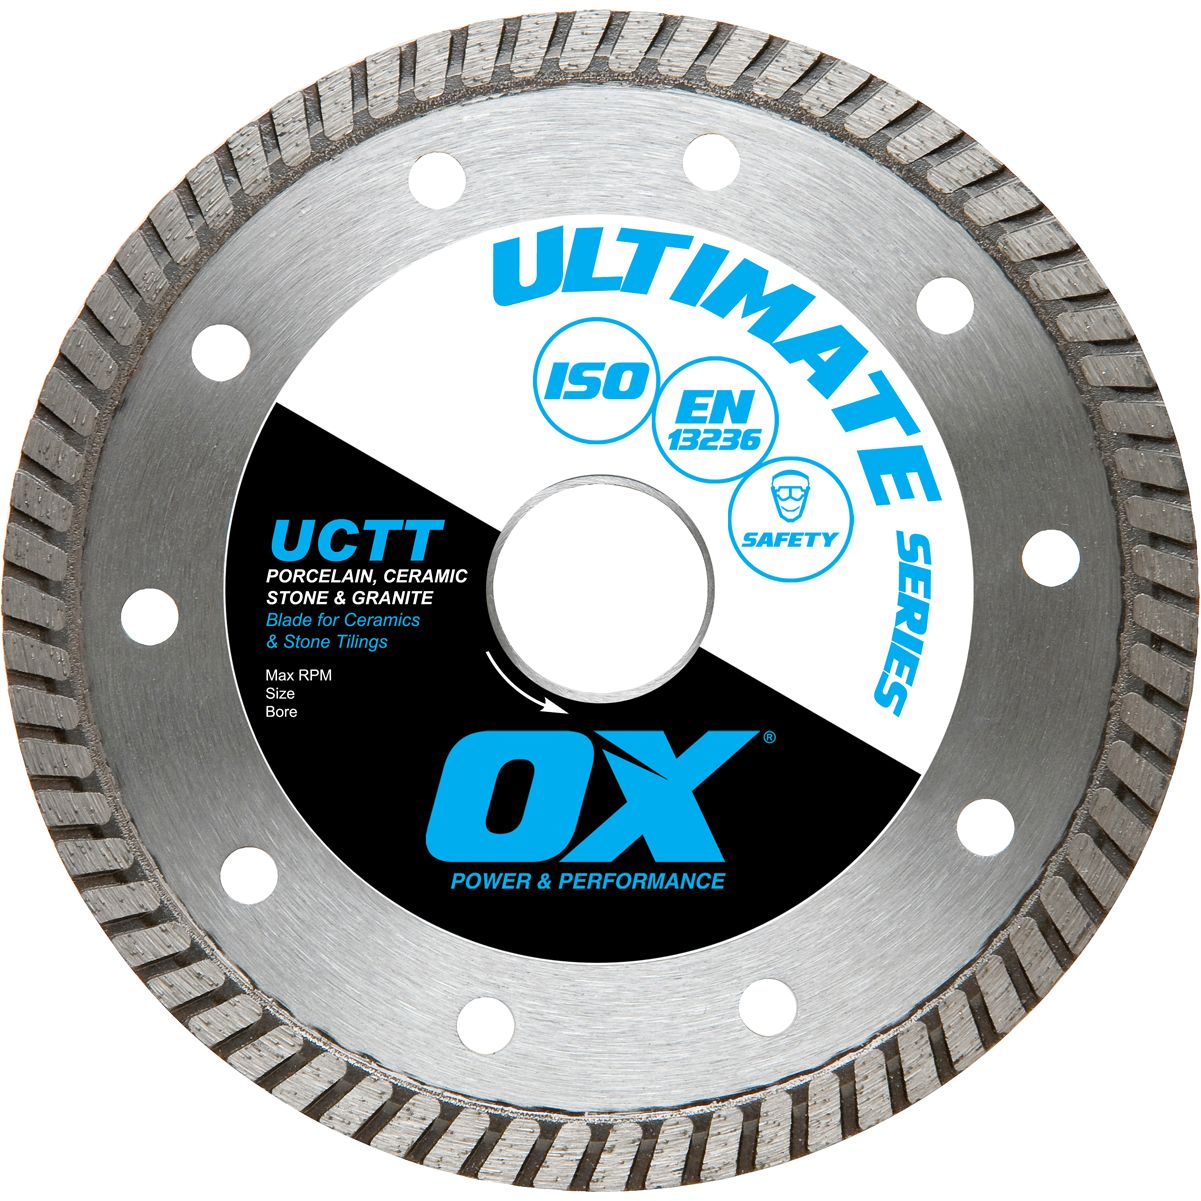 Diamond Saw Blade- Thin Turbo Rim Cuts Porcelain Tiles- UCTT Carbour Tools